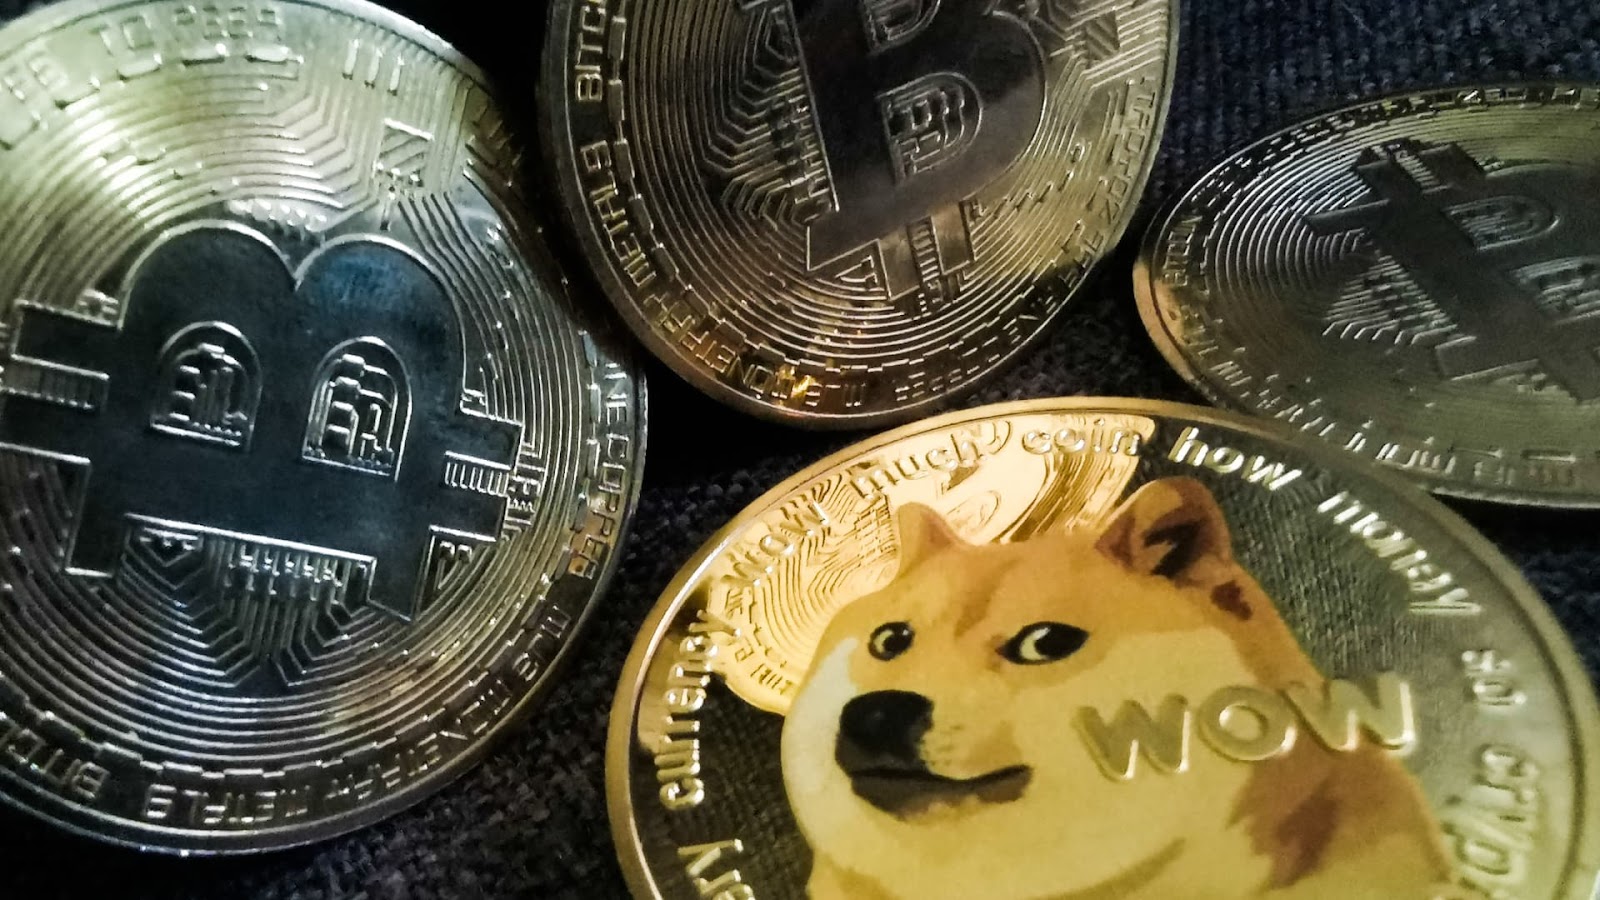 Tracking the Steady Dogecoin Price’s Growth